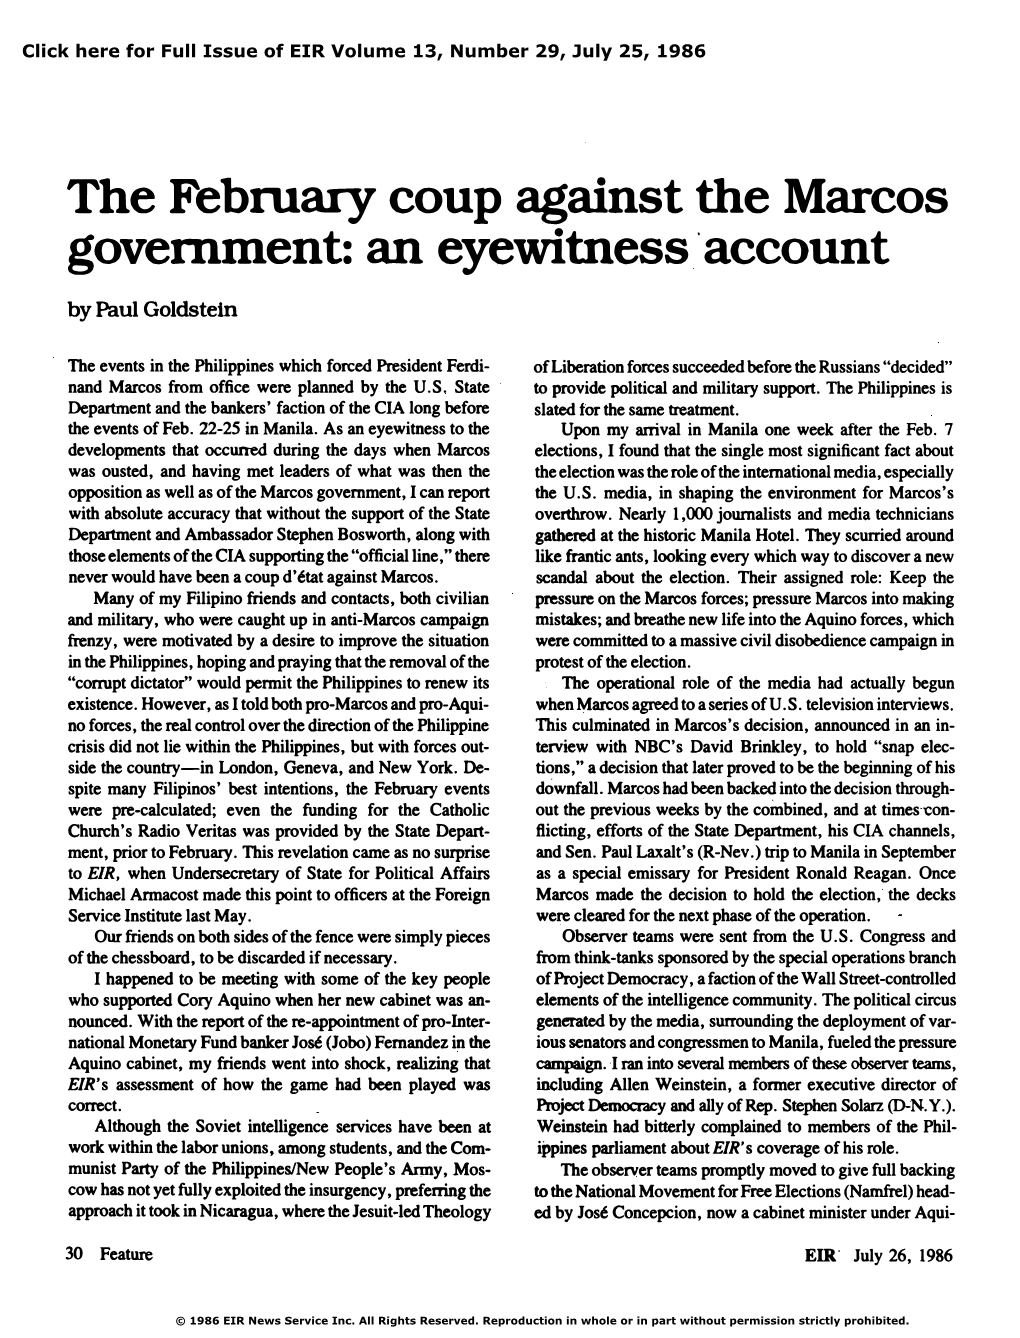 The February Coup Against the Marcos Government